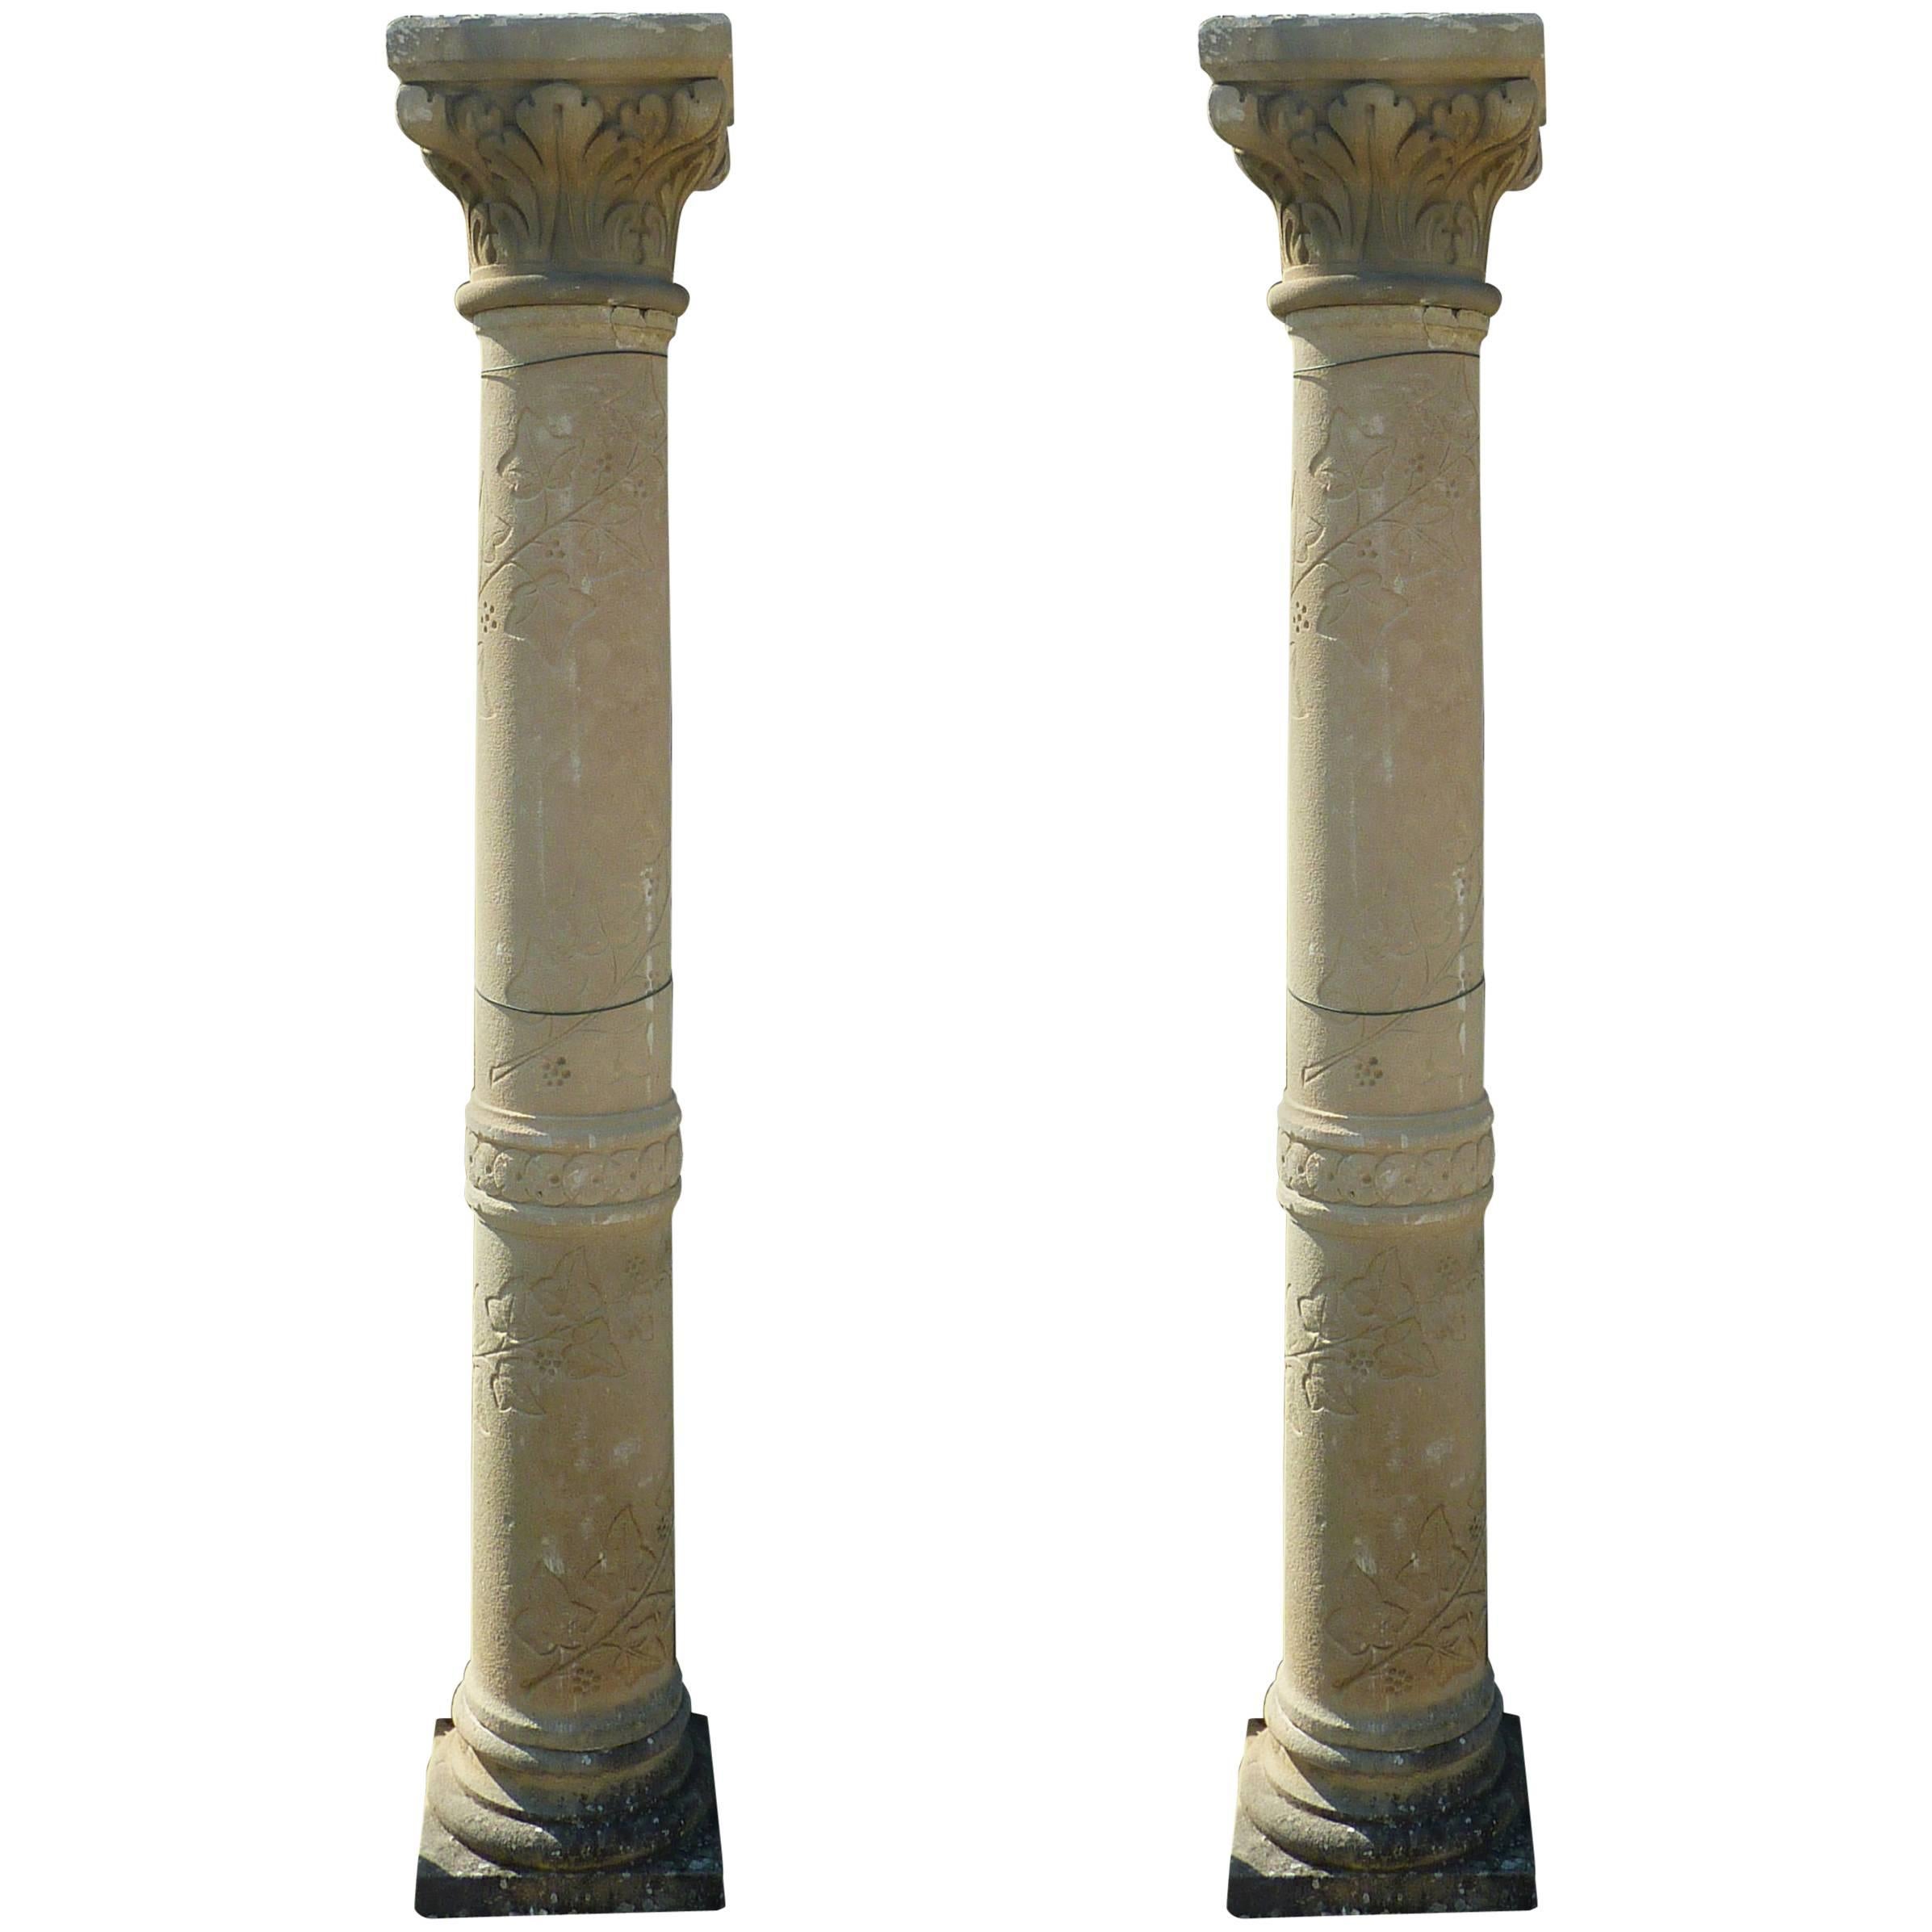 Rare Pair of Finely Hand-Sculpted Stone Columns, France